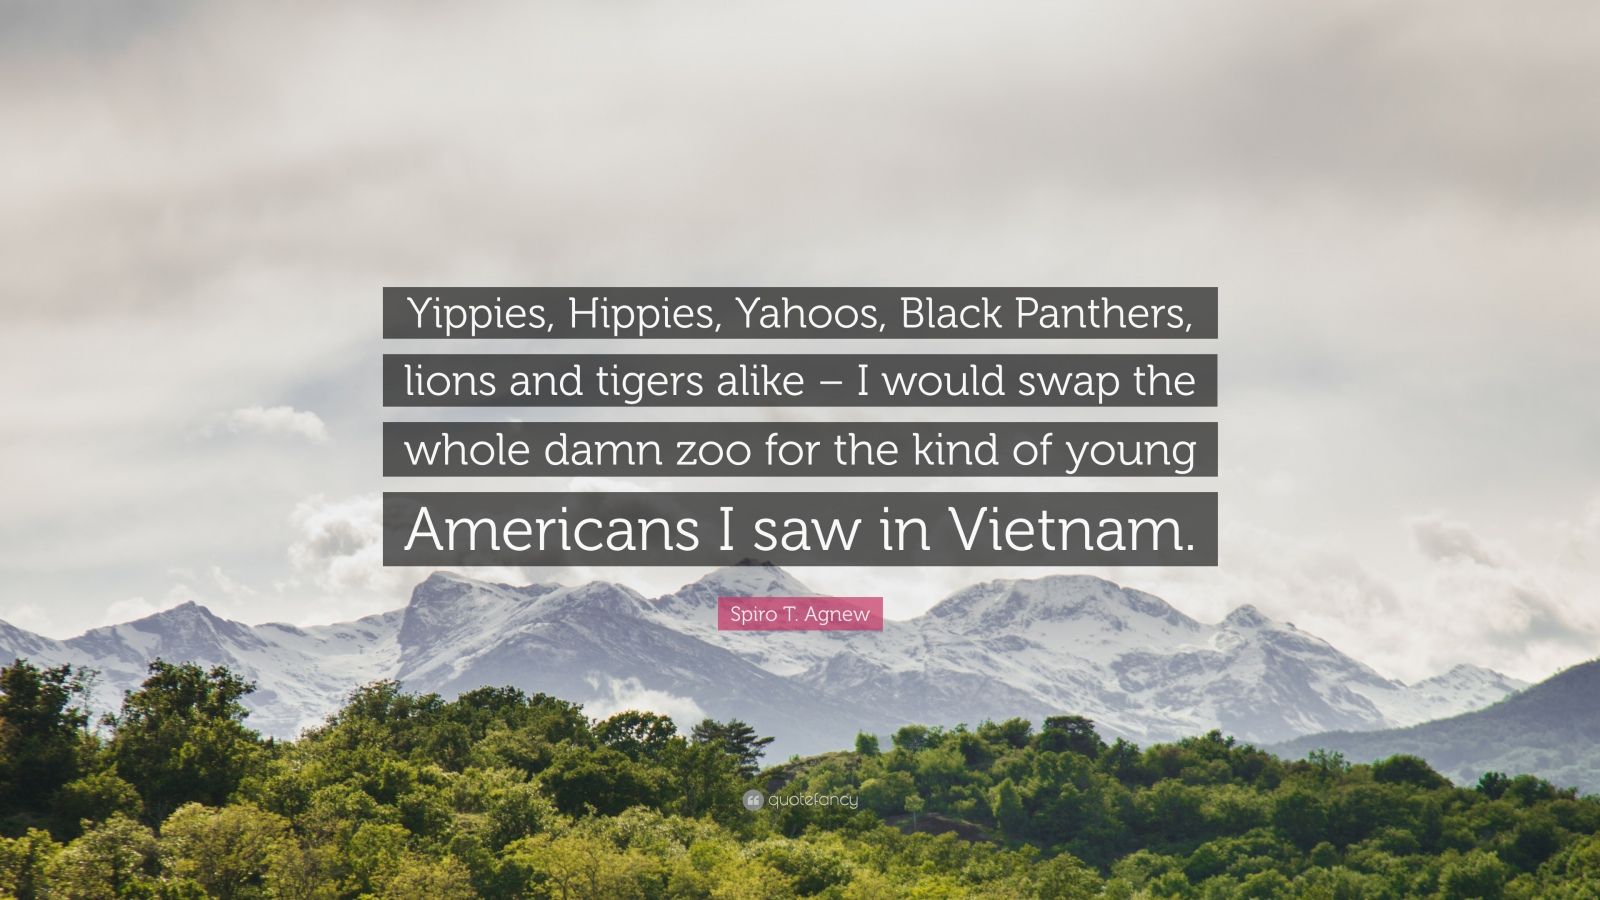 https://quotefancy.com/media/wallpaper/1600x900/829555-Spiro-T-Agnew-Quote-Yippies-Hippies-Yahoos-Black-Panthers-lions.jpg